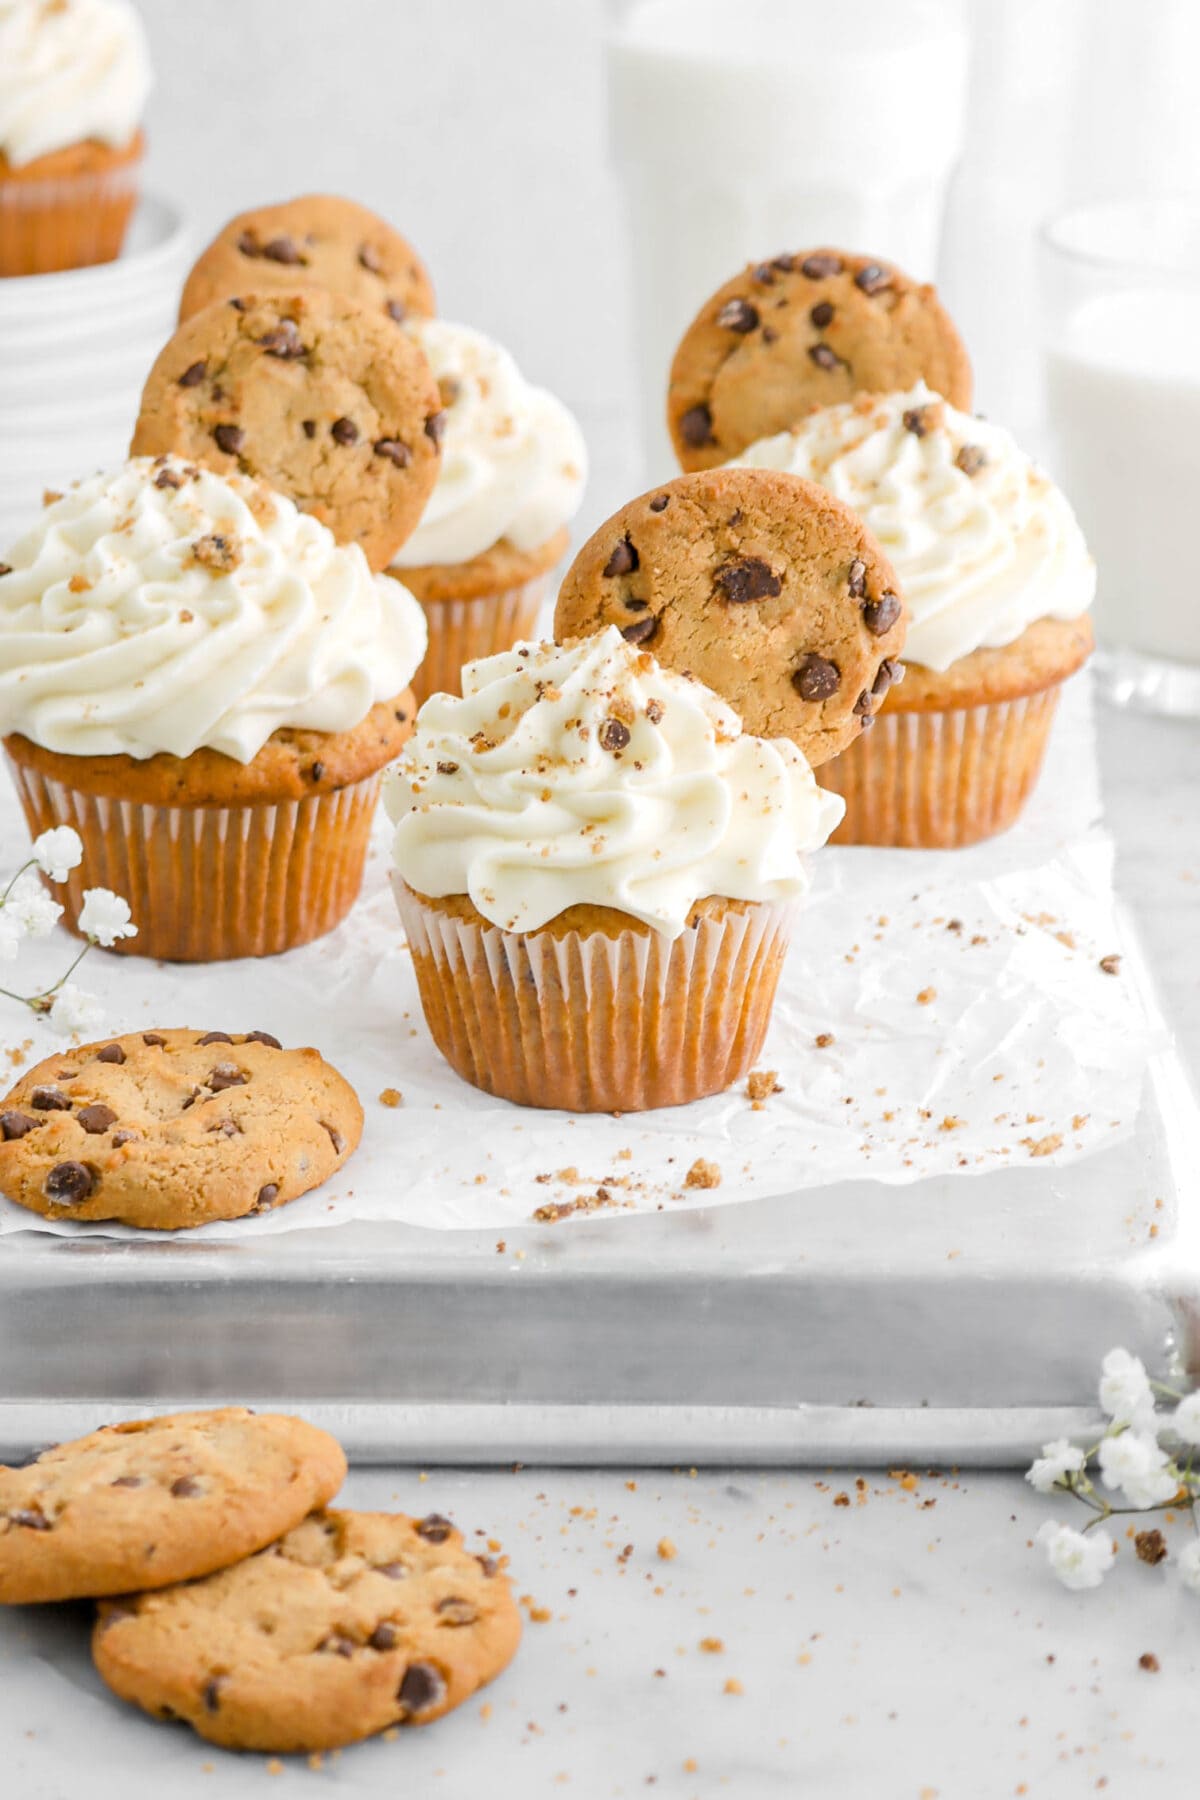 chocolate chip cookie cupcakes on upside down sheet pan with two glasses of milk and a stack of plates with another cupcake behind, with white flowers, cookies, and cookie crumbs around cupcakes on marble surface.